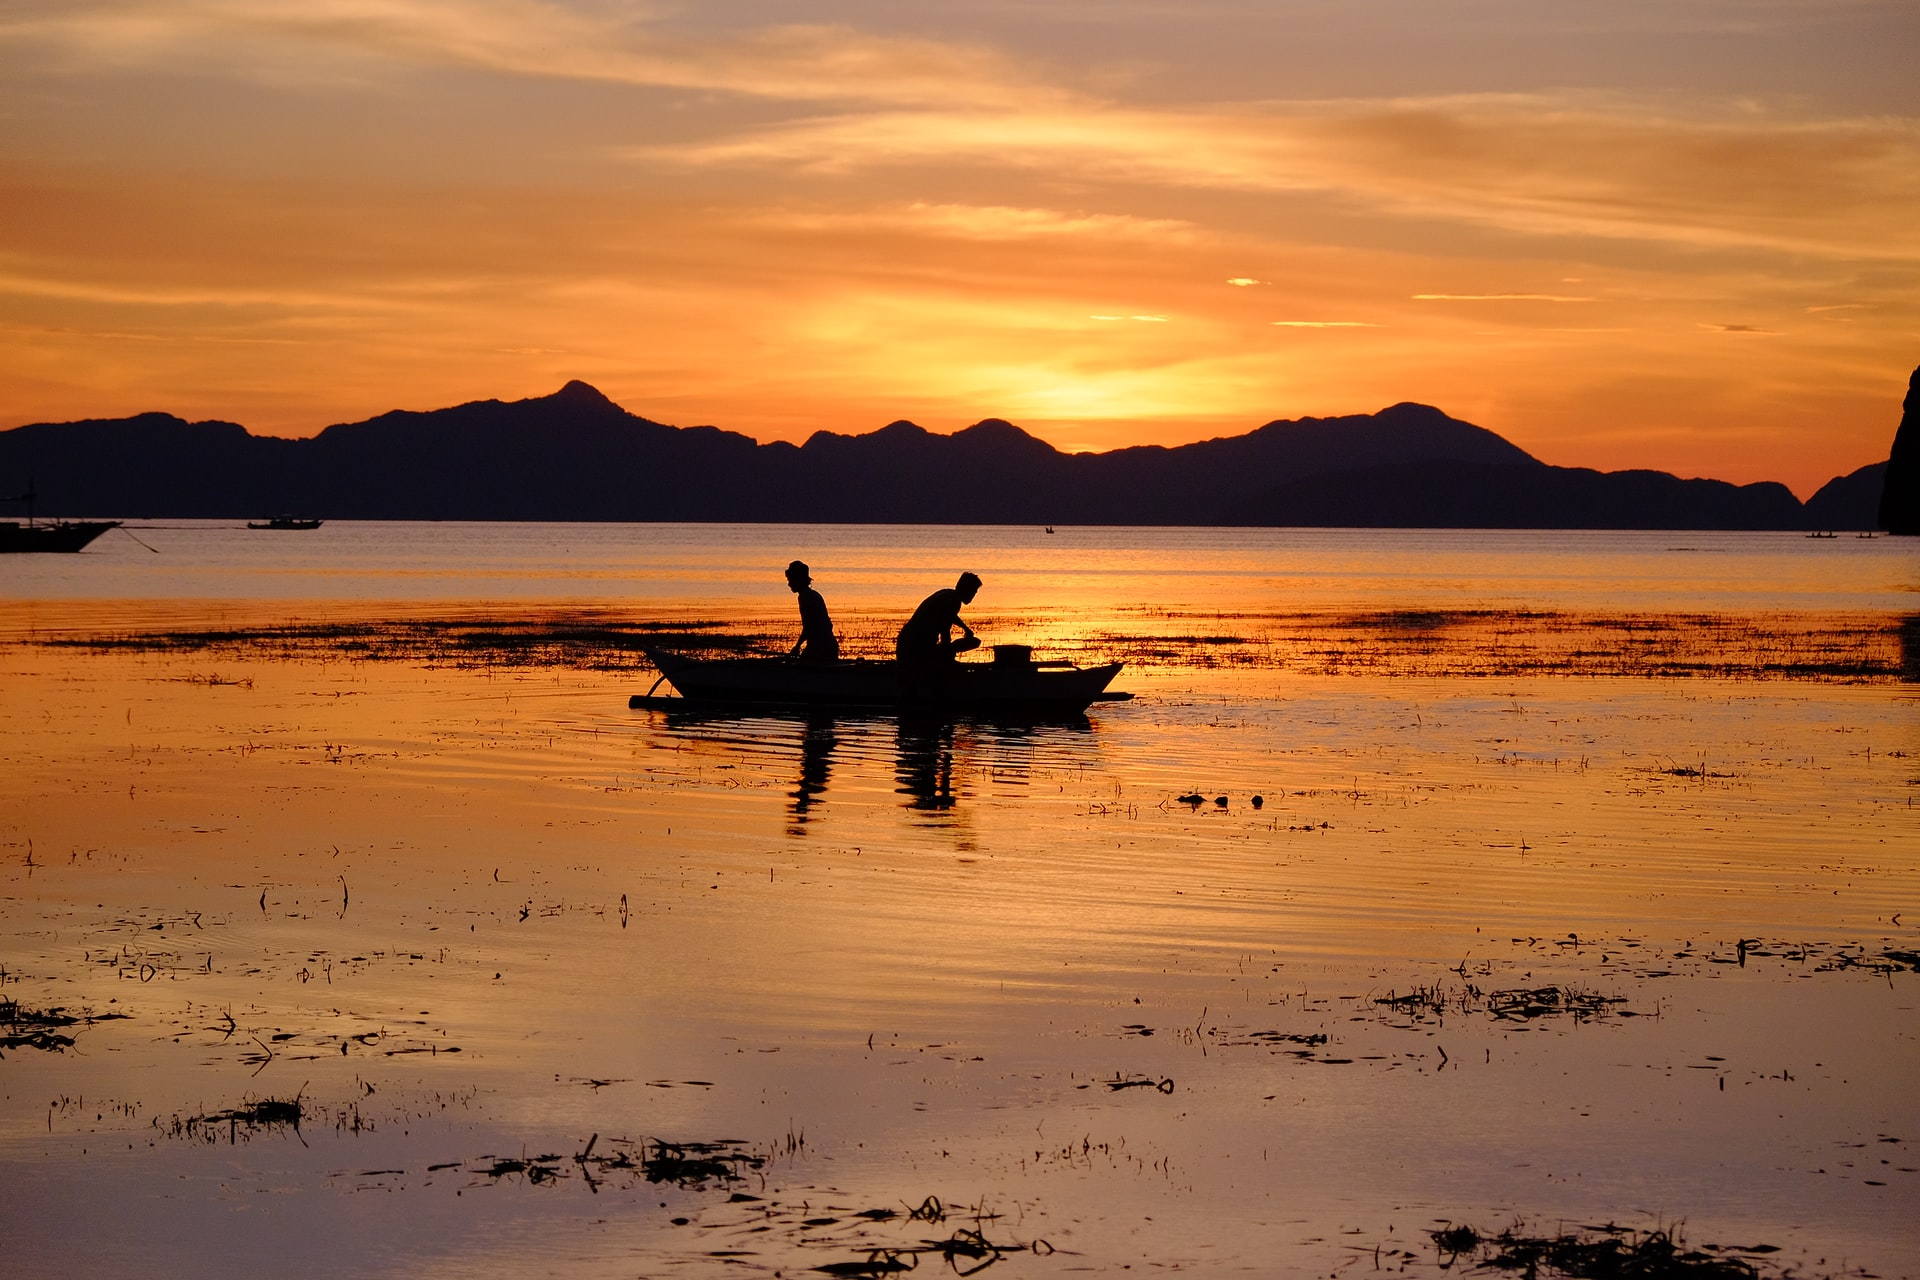 silhouette of two people in a boat in a body of water during sunset